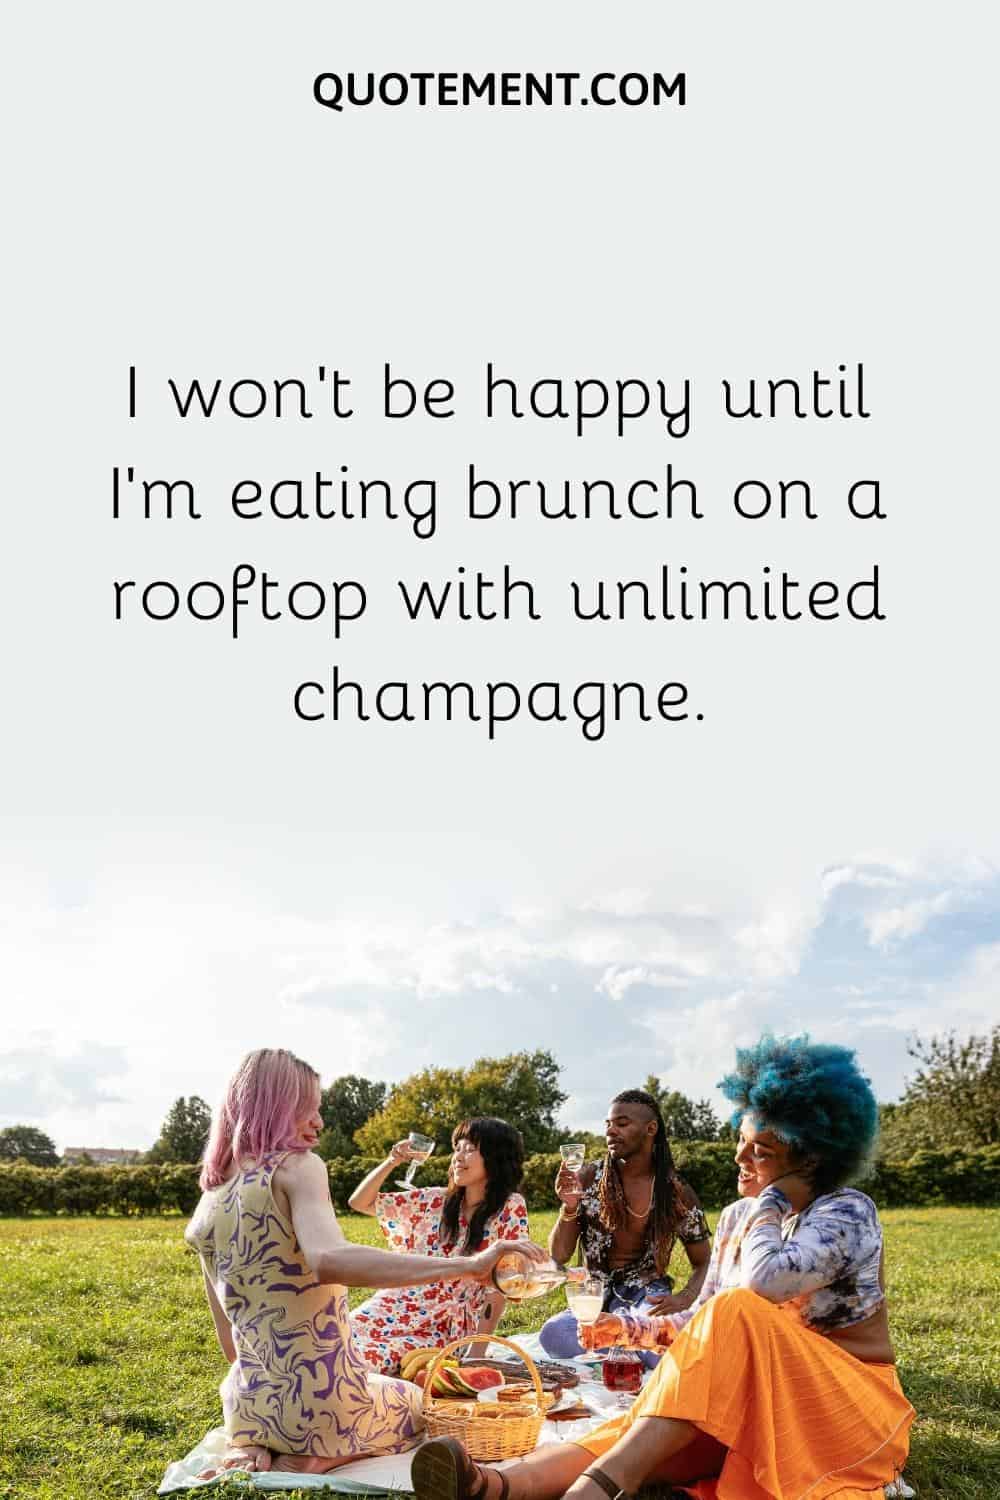 I won't be happy until I'm eating brunch on a rooftop with unlimited champagne.